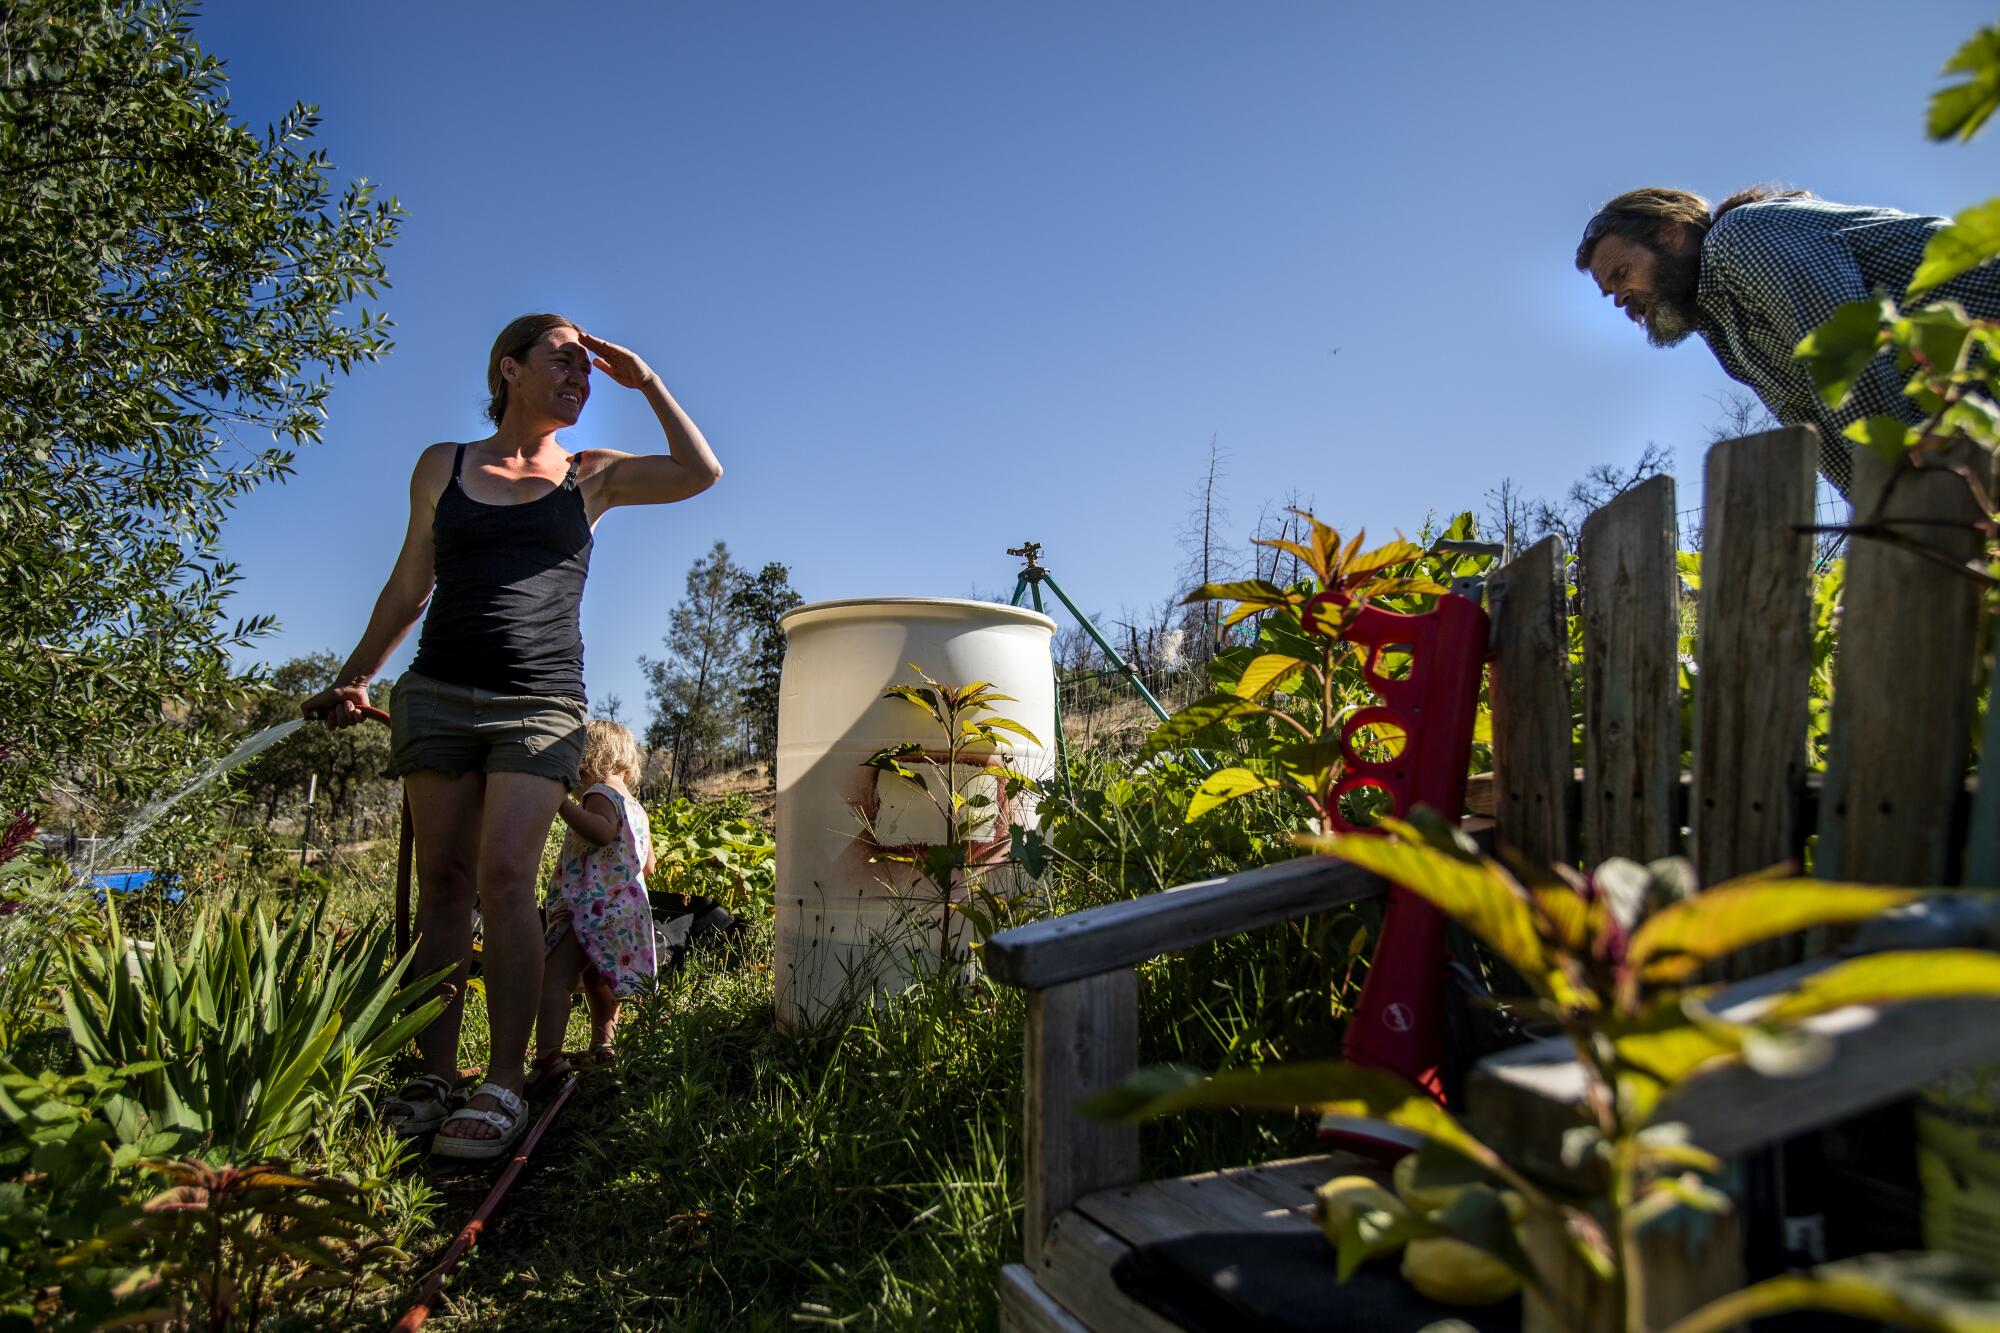 Lacey Nimz, with her young daughter at her side, waters while Mike Nimz bends, inspecting plants.